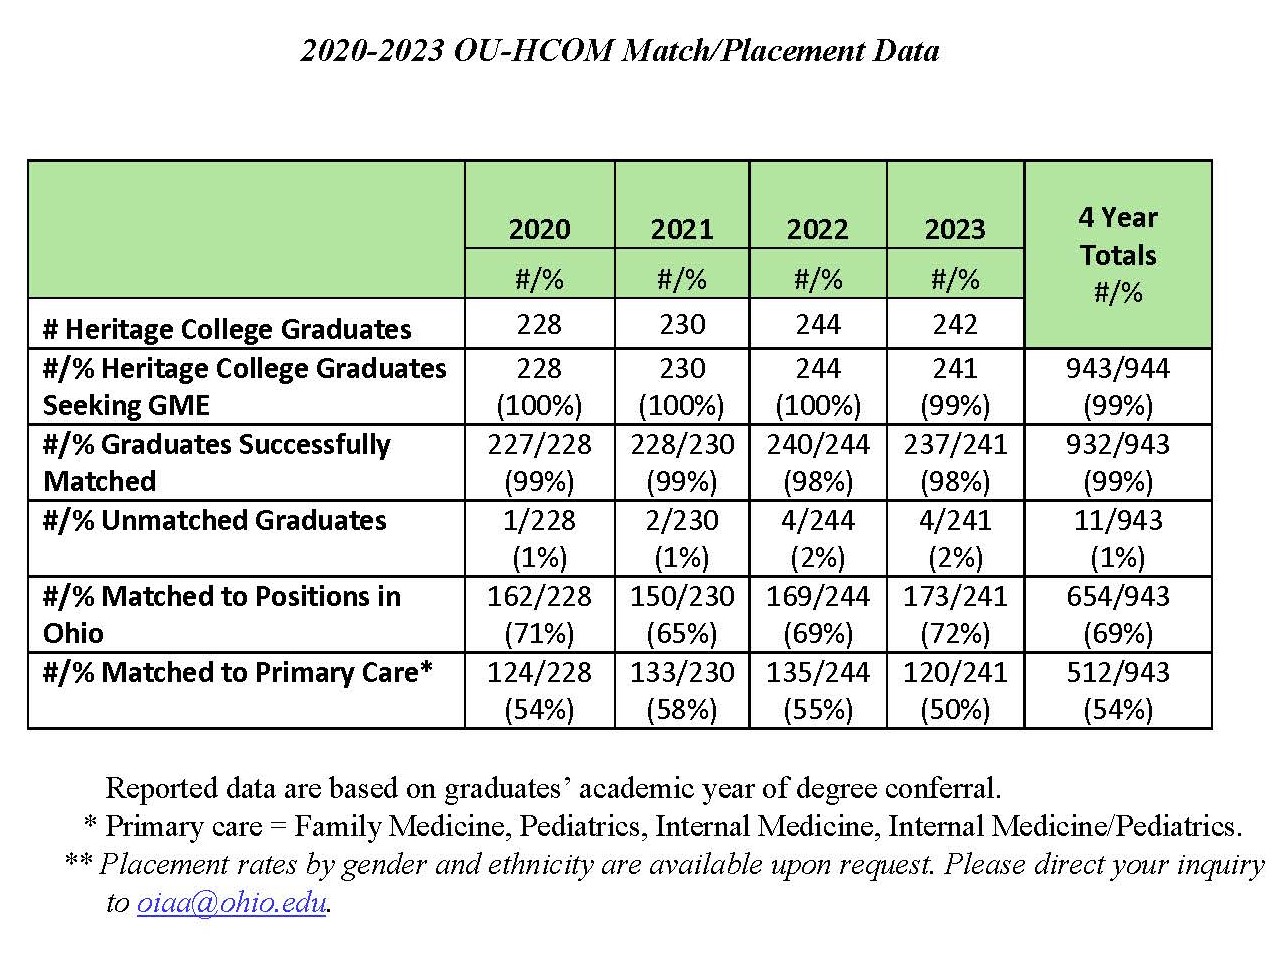 Table of 2020-2023 Heritage College match and placement data